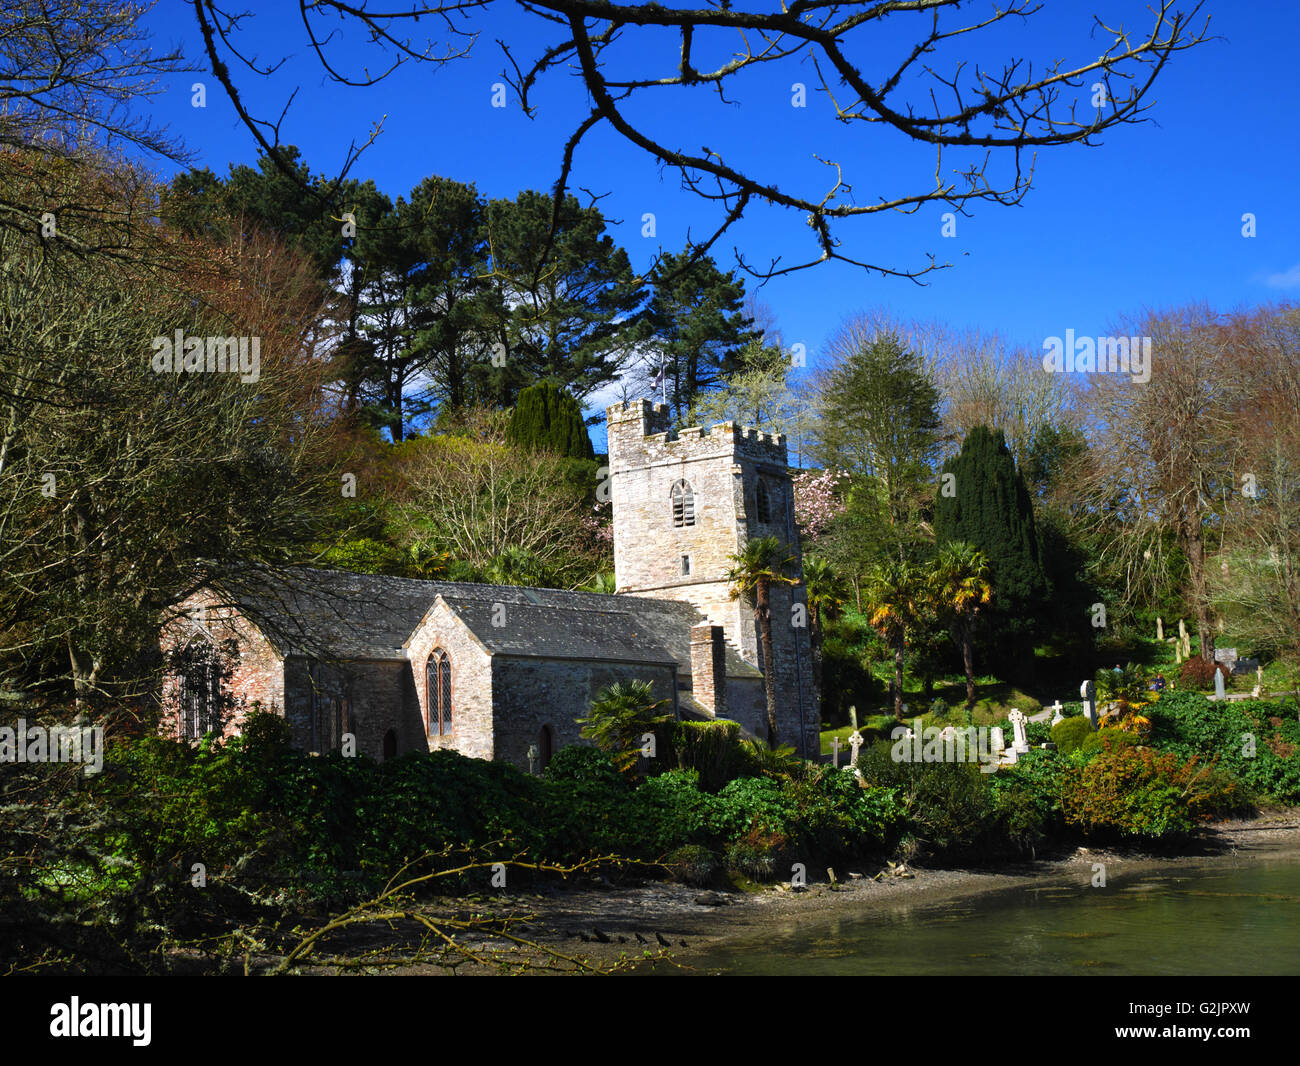 The church of St Just in Roseland, Cornwall stands on the bank of a creek of the Fal. Stock Photo